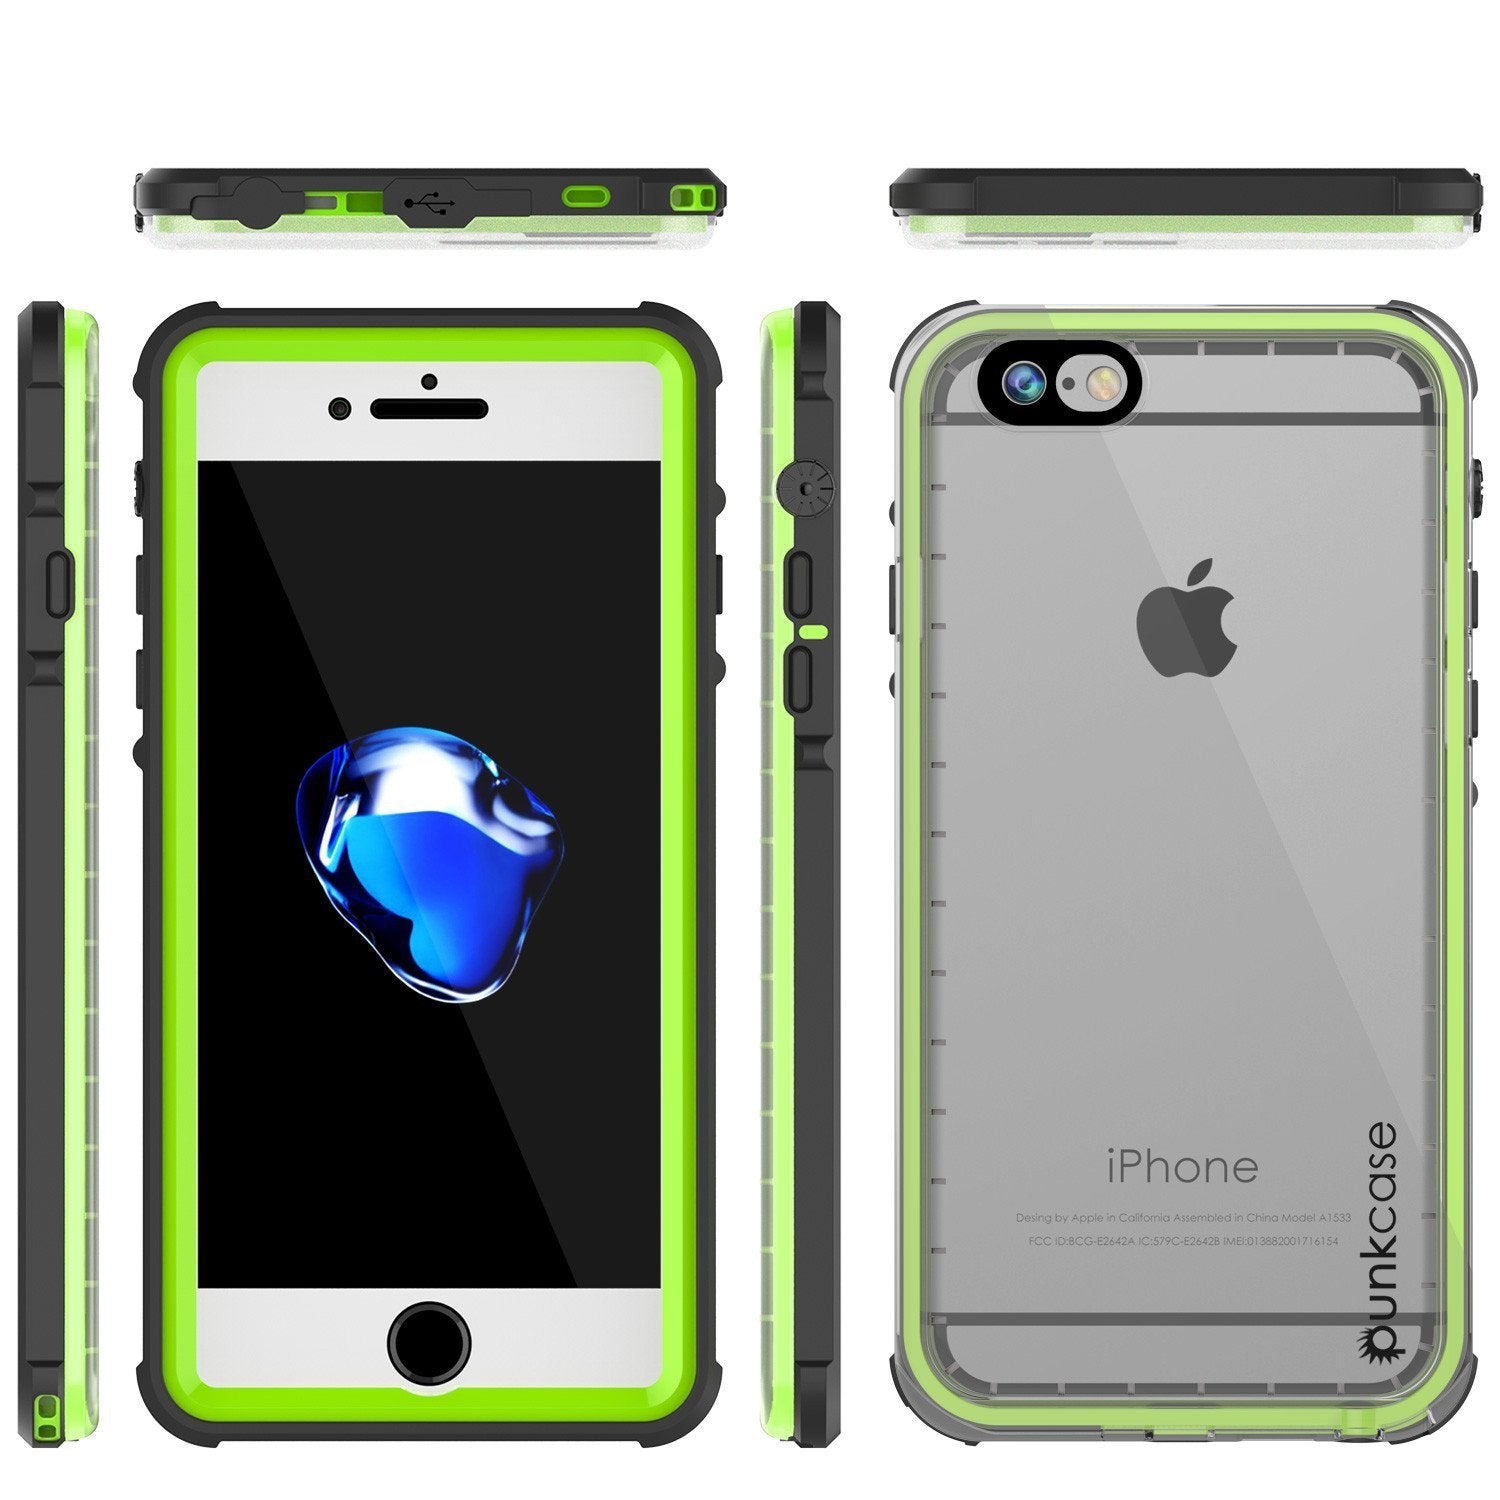 Apple iPhone SE (4.7") Waterproof Case, PUNKcase CRYSTAL Light Green  W/ Attached Screen Protector  | Warranty (Color in image: Light Green)